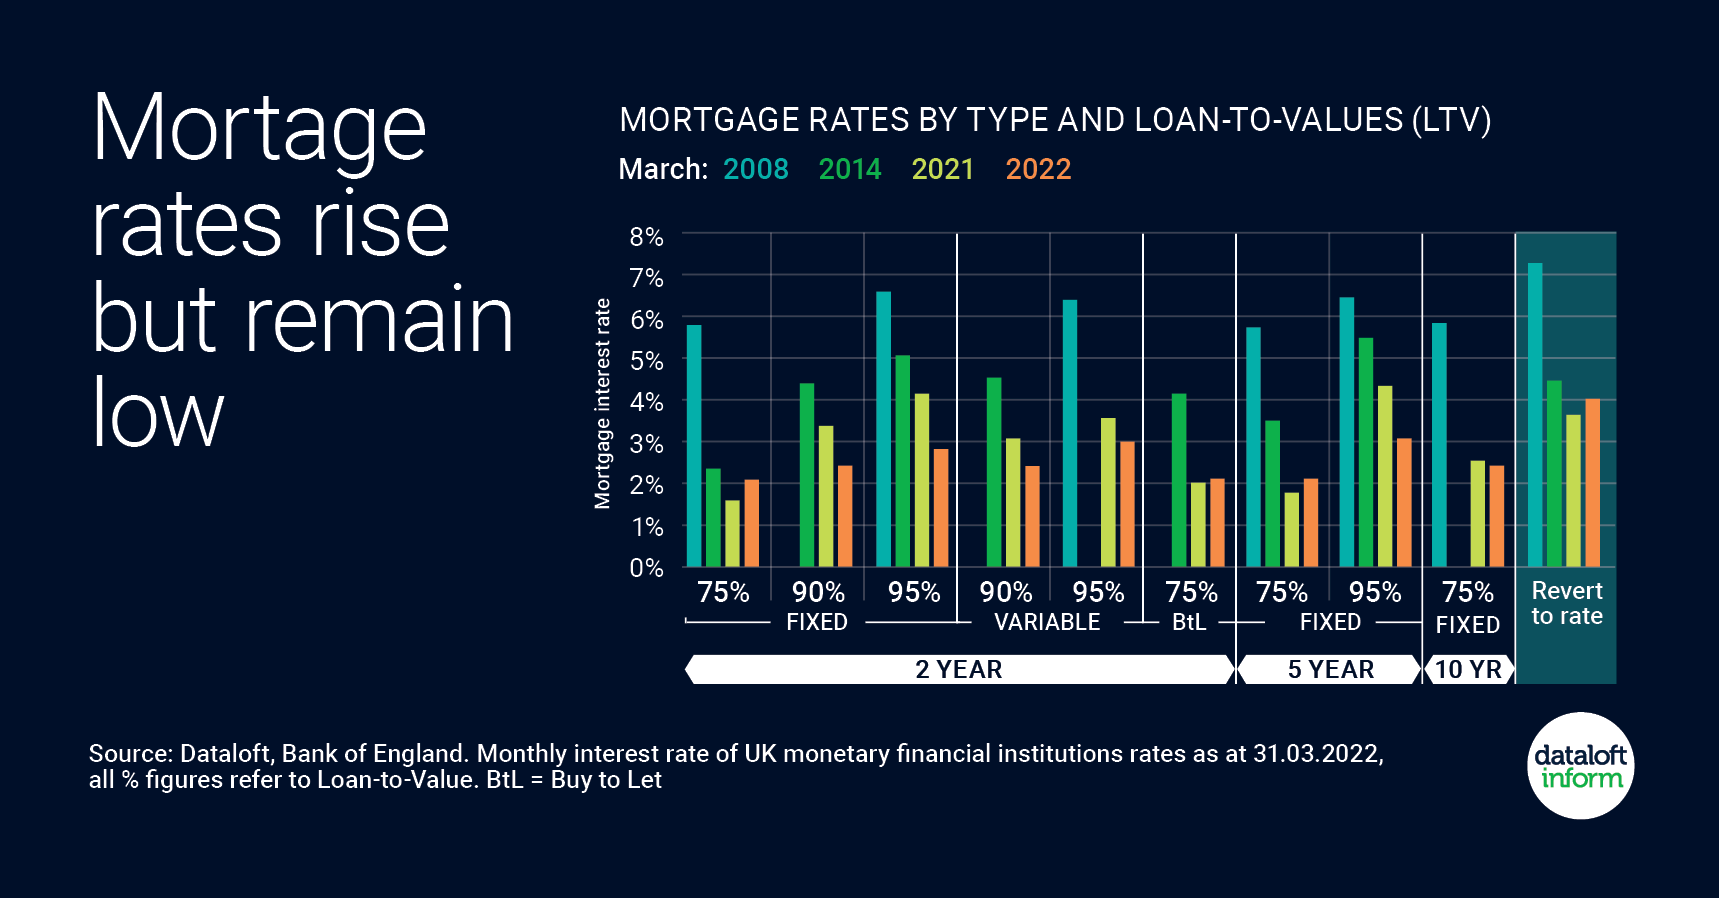 The cost of borrowing remains historically low